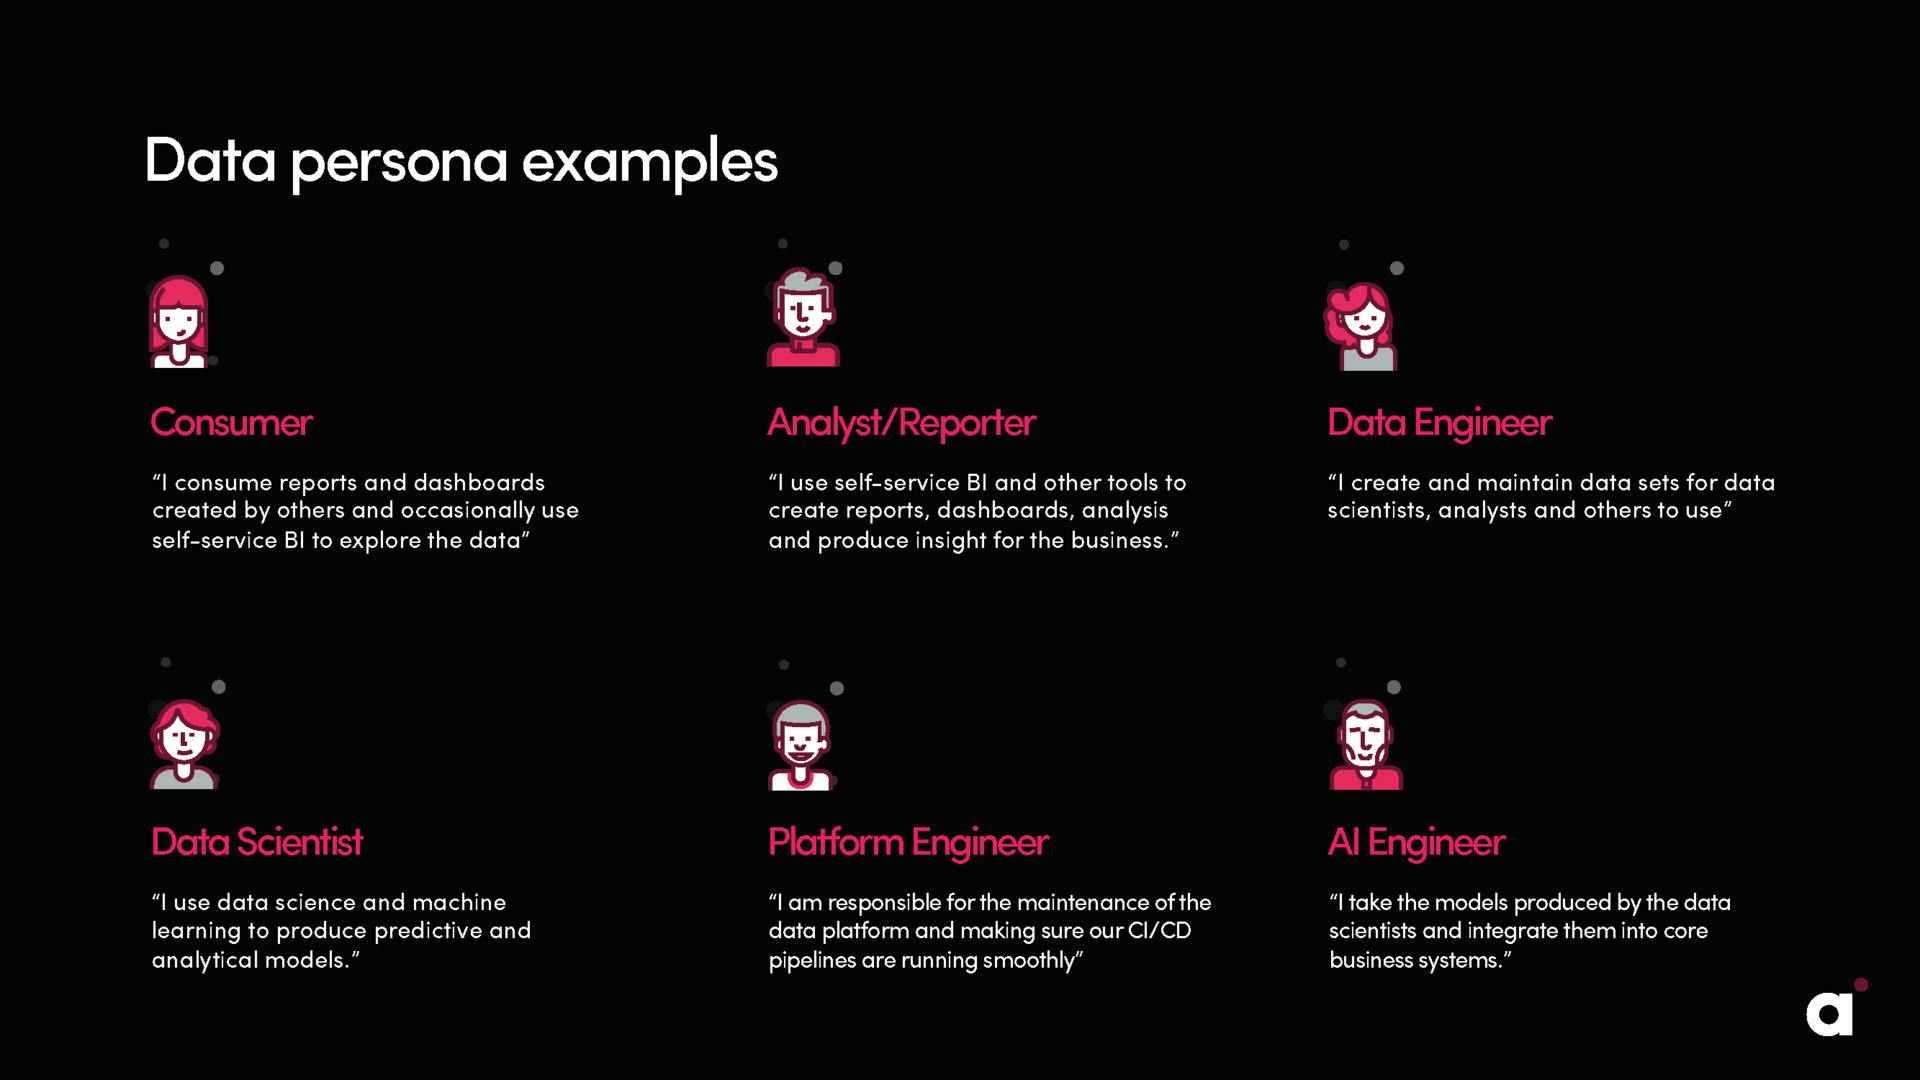 From BI to AI - Data persona examples